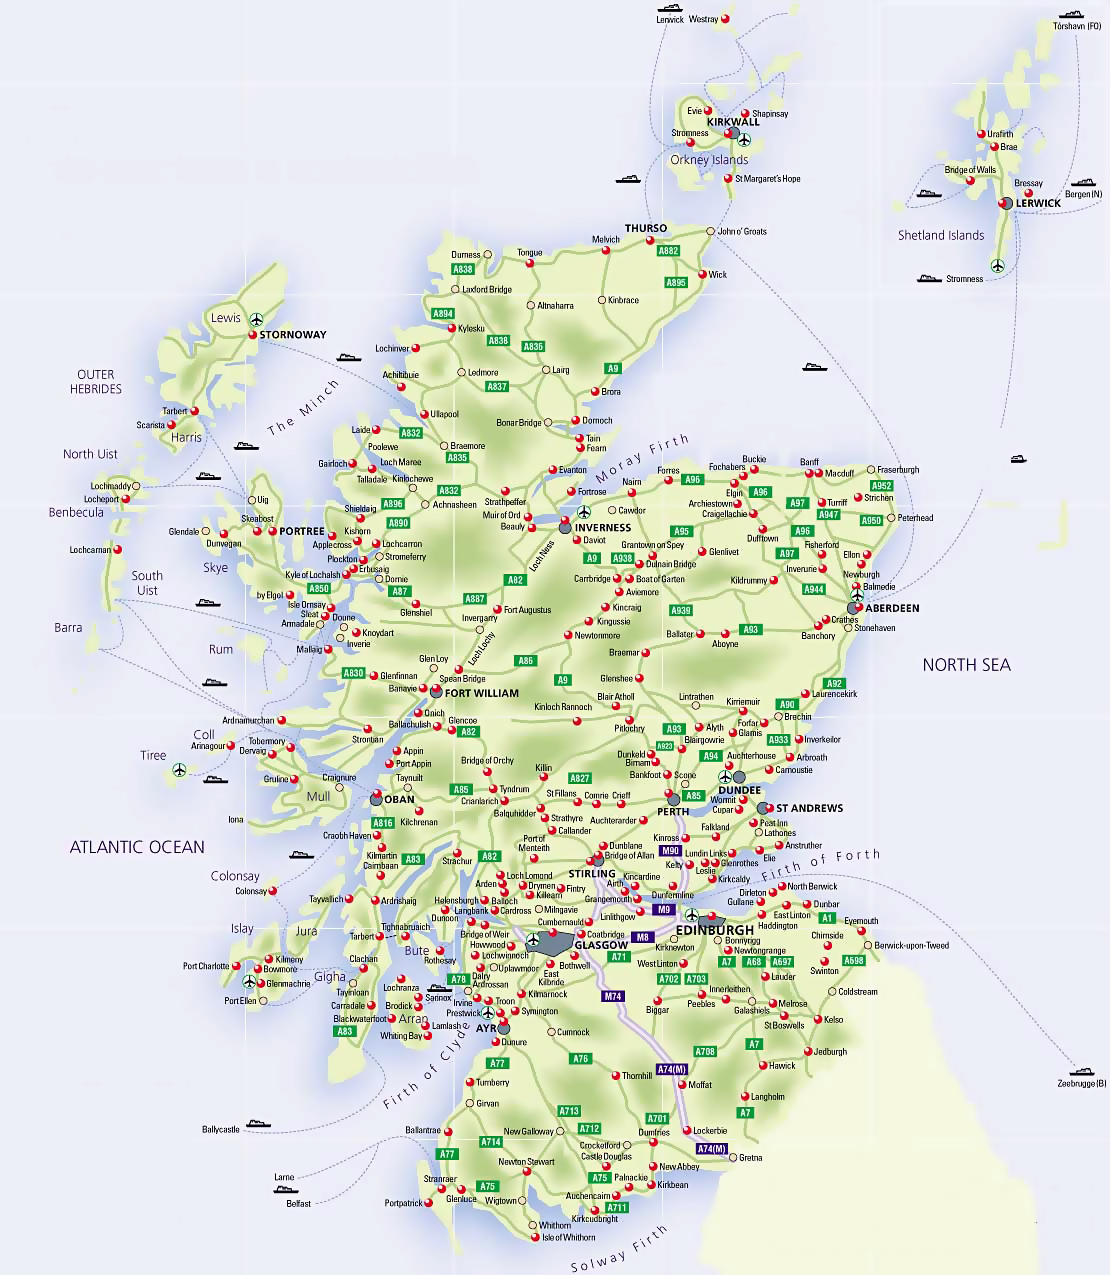 road-map-of-scotland-with-airports-and-cities-scotland-united